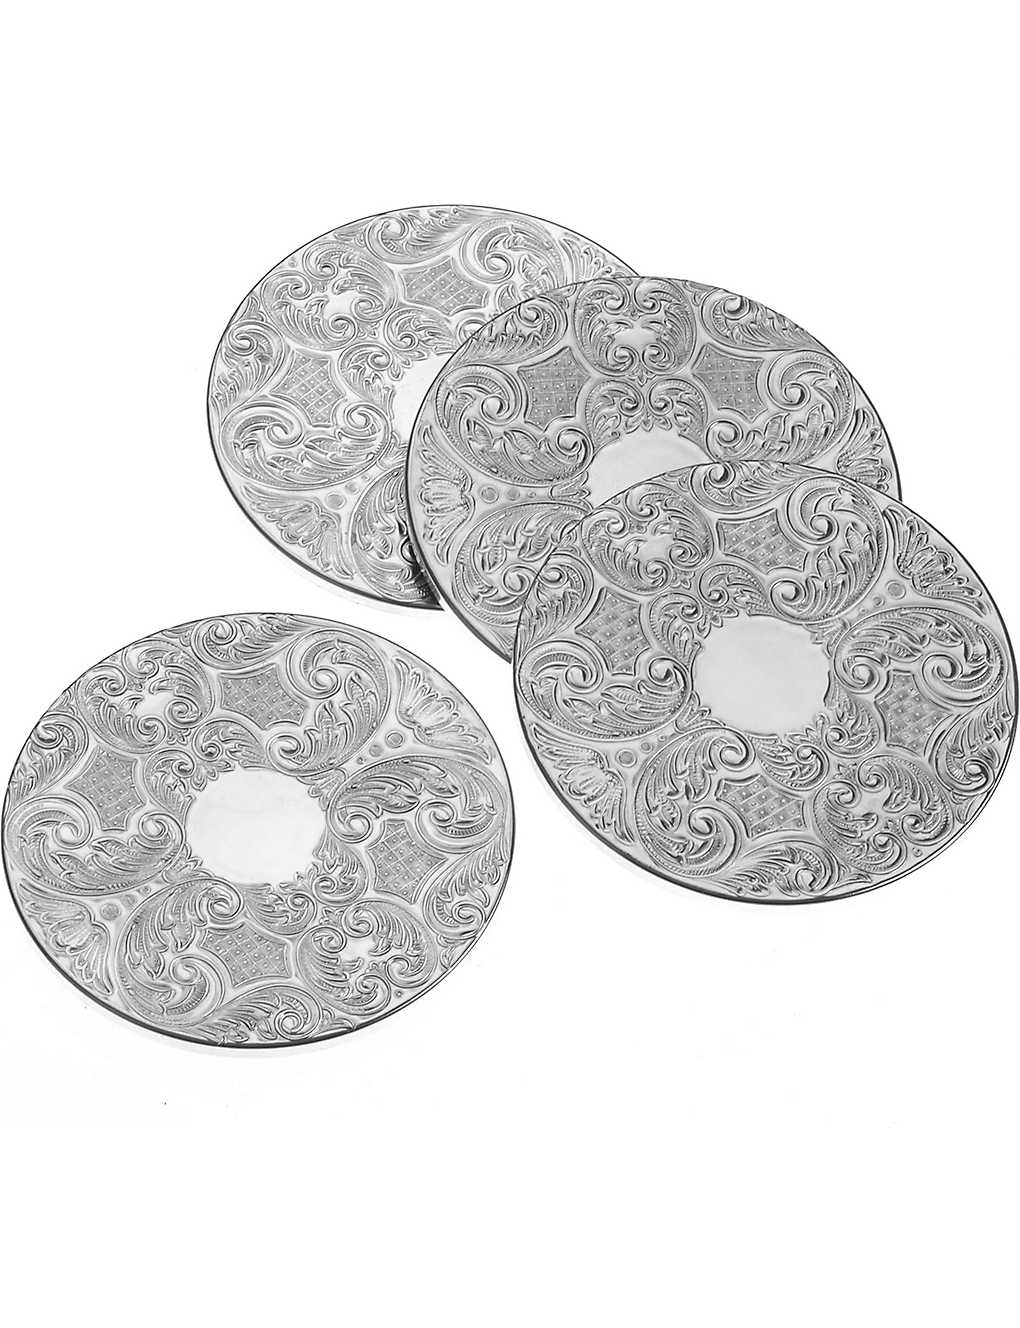 ARTHUR PRICE 銀メッキ 4個セット コースターセット Silver-plated four-piece coasters set